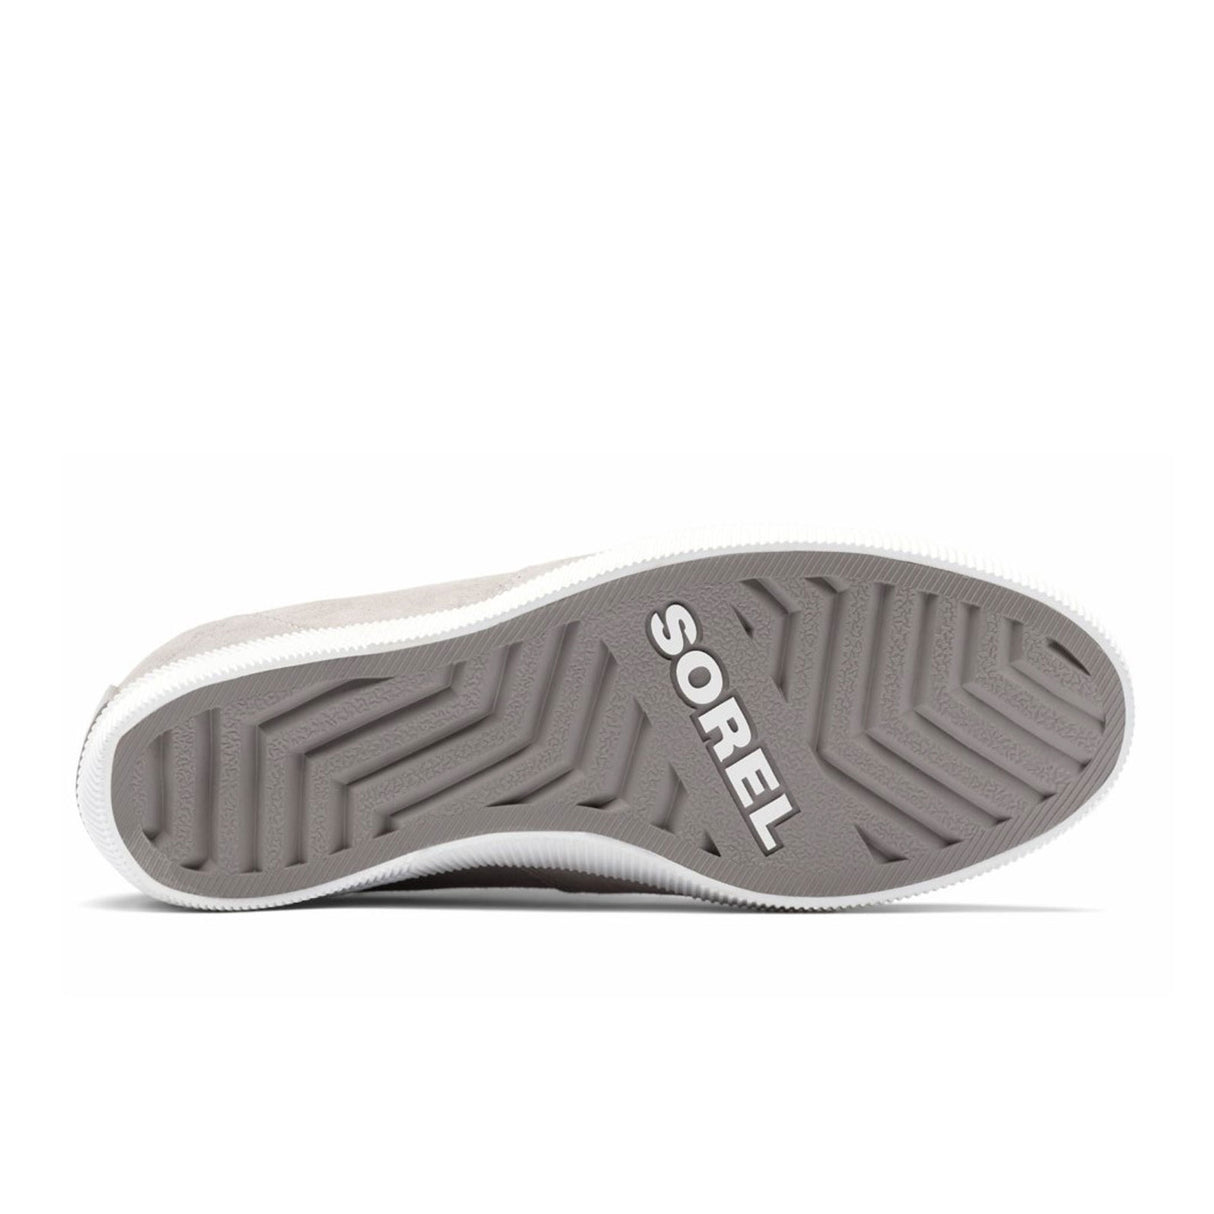 Sorel Out N About Slip On Wedge Ankle Boot (Women) - Chrome Grey/White Boots - Casual - Low - The Heel Shoe Fitters